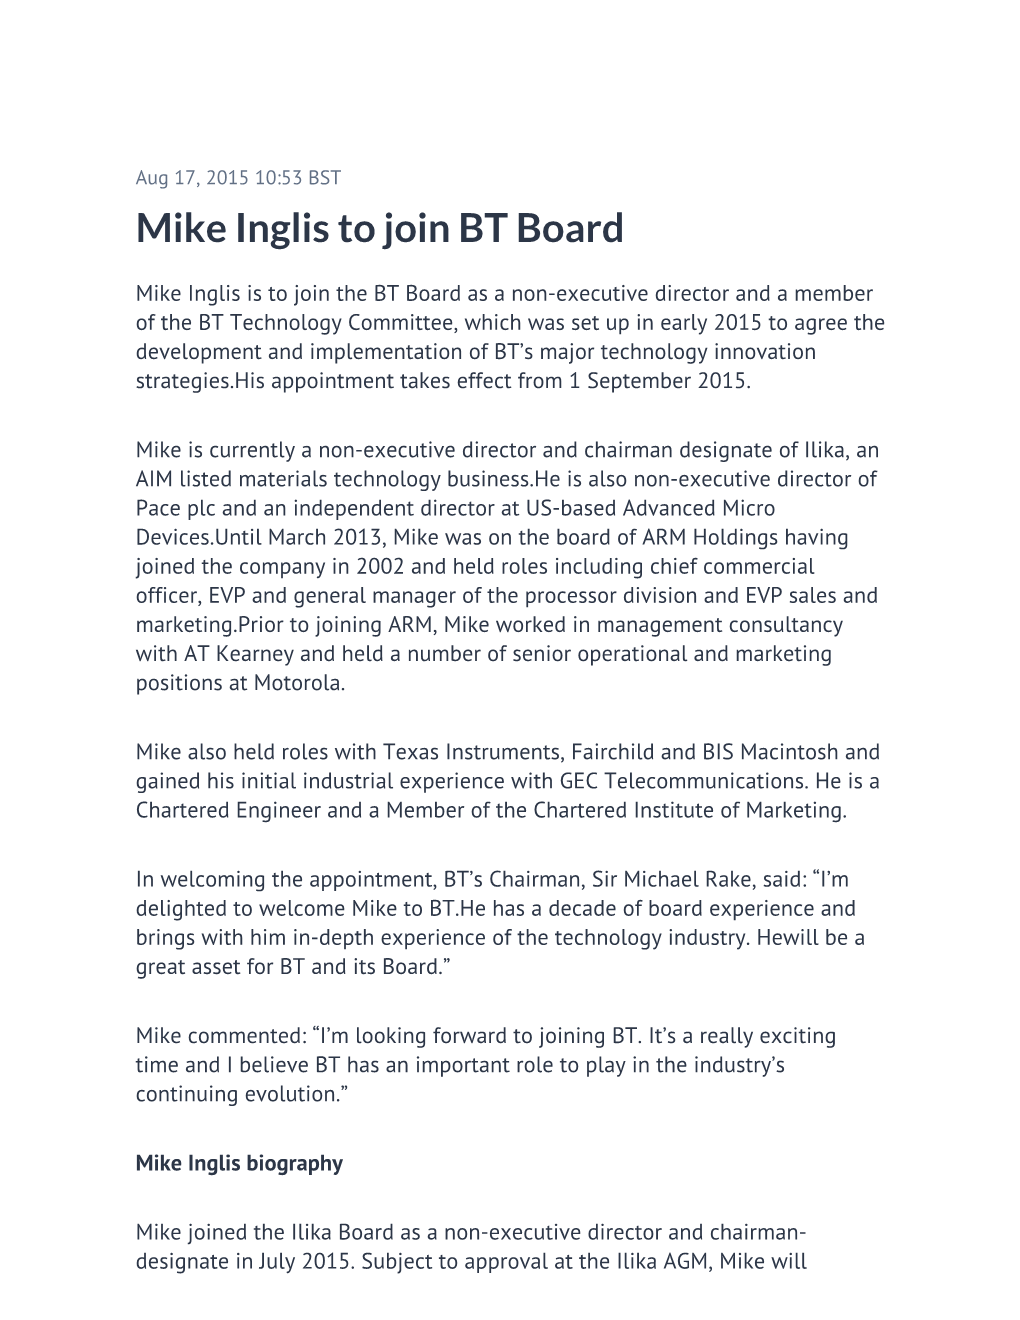 Mike Inglis to Join BT Board